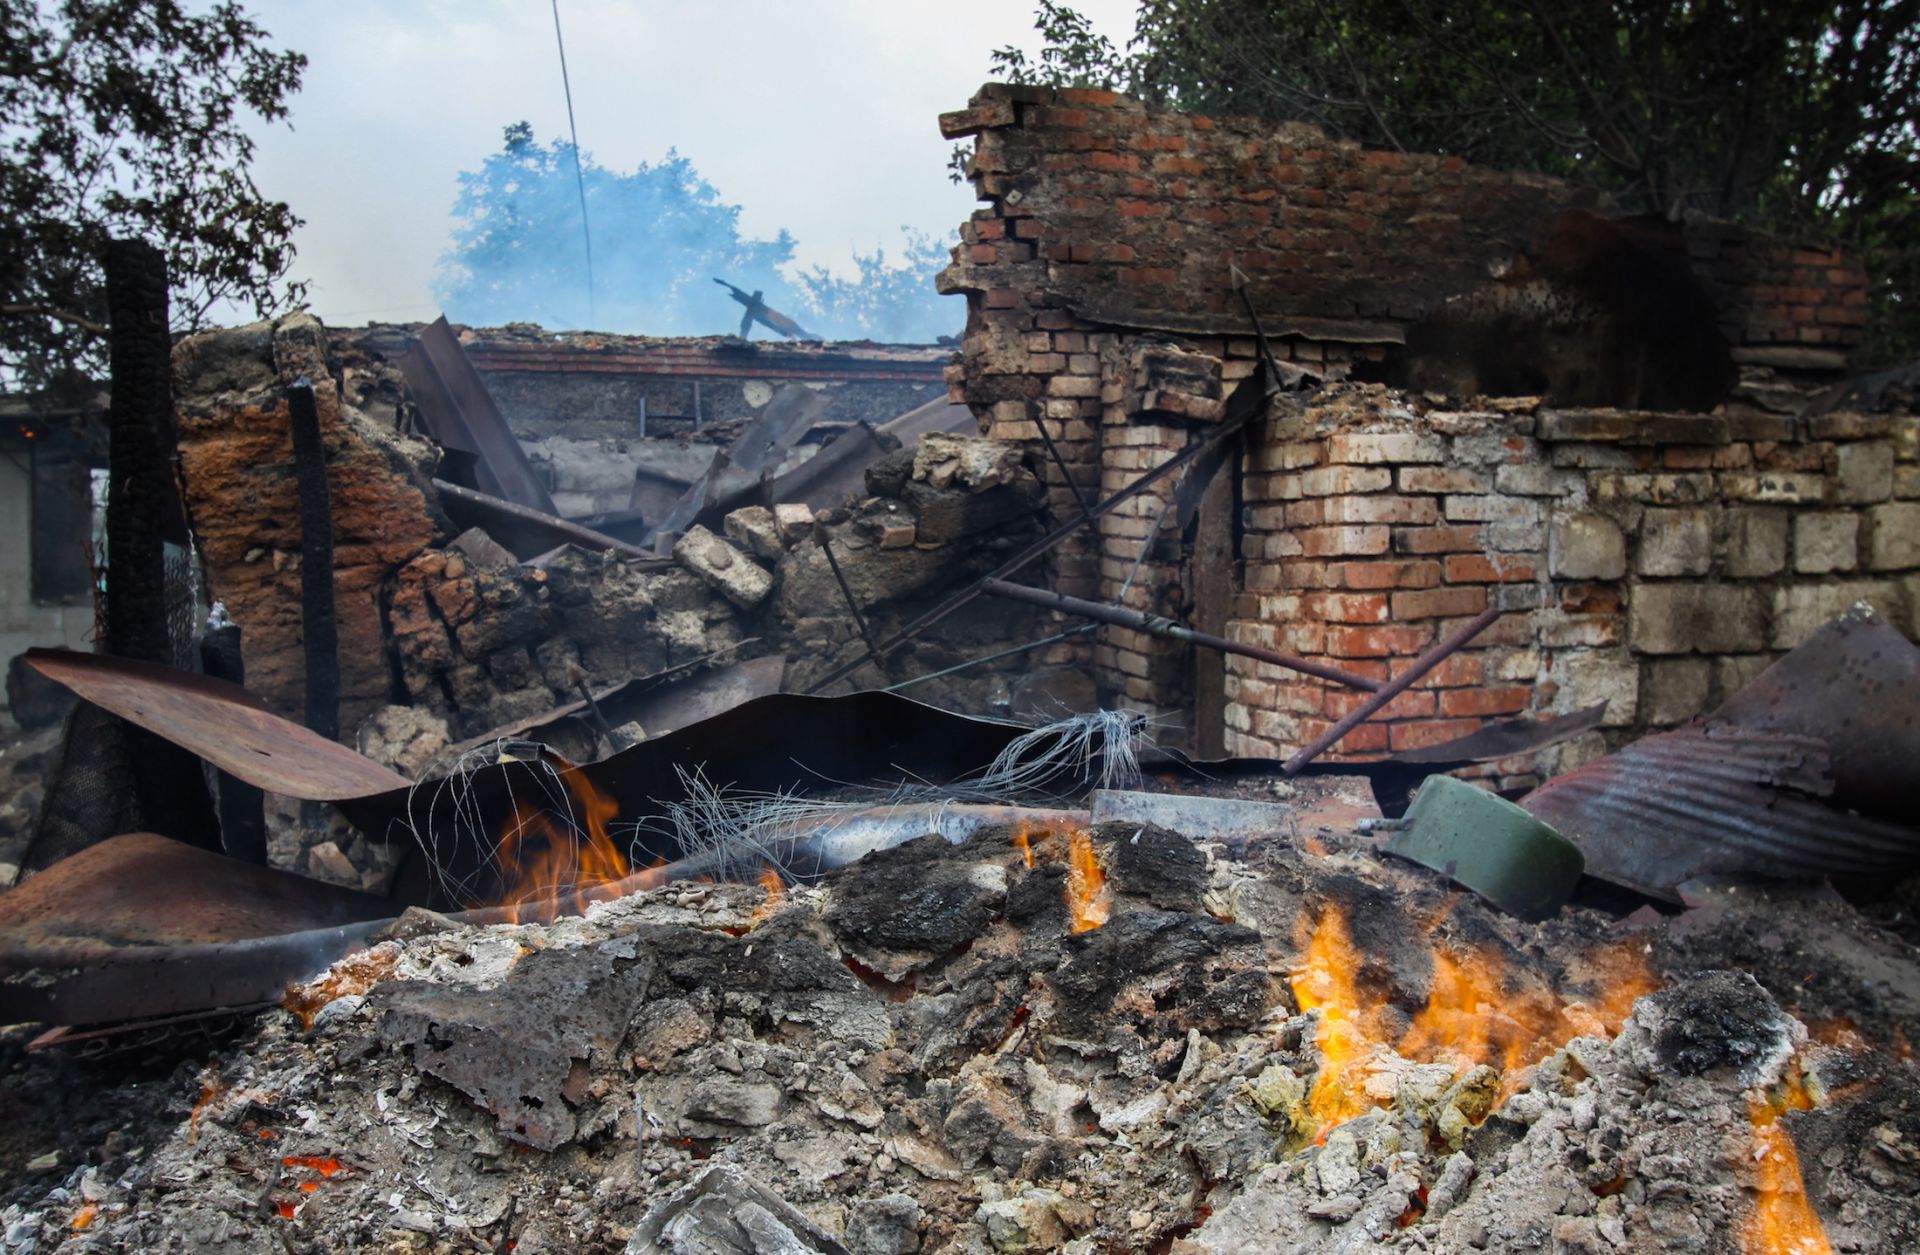 A house in the village of Roza in eastern Ukraine is left burning after fighting between Ukrainian forces and Russian separatists on Sept. 6, 2019.